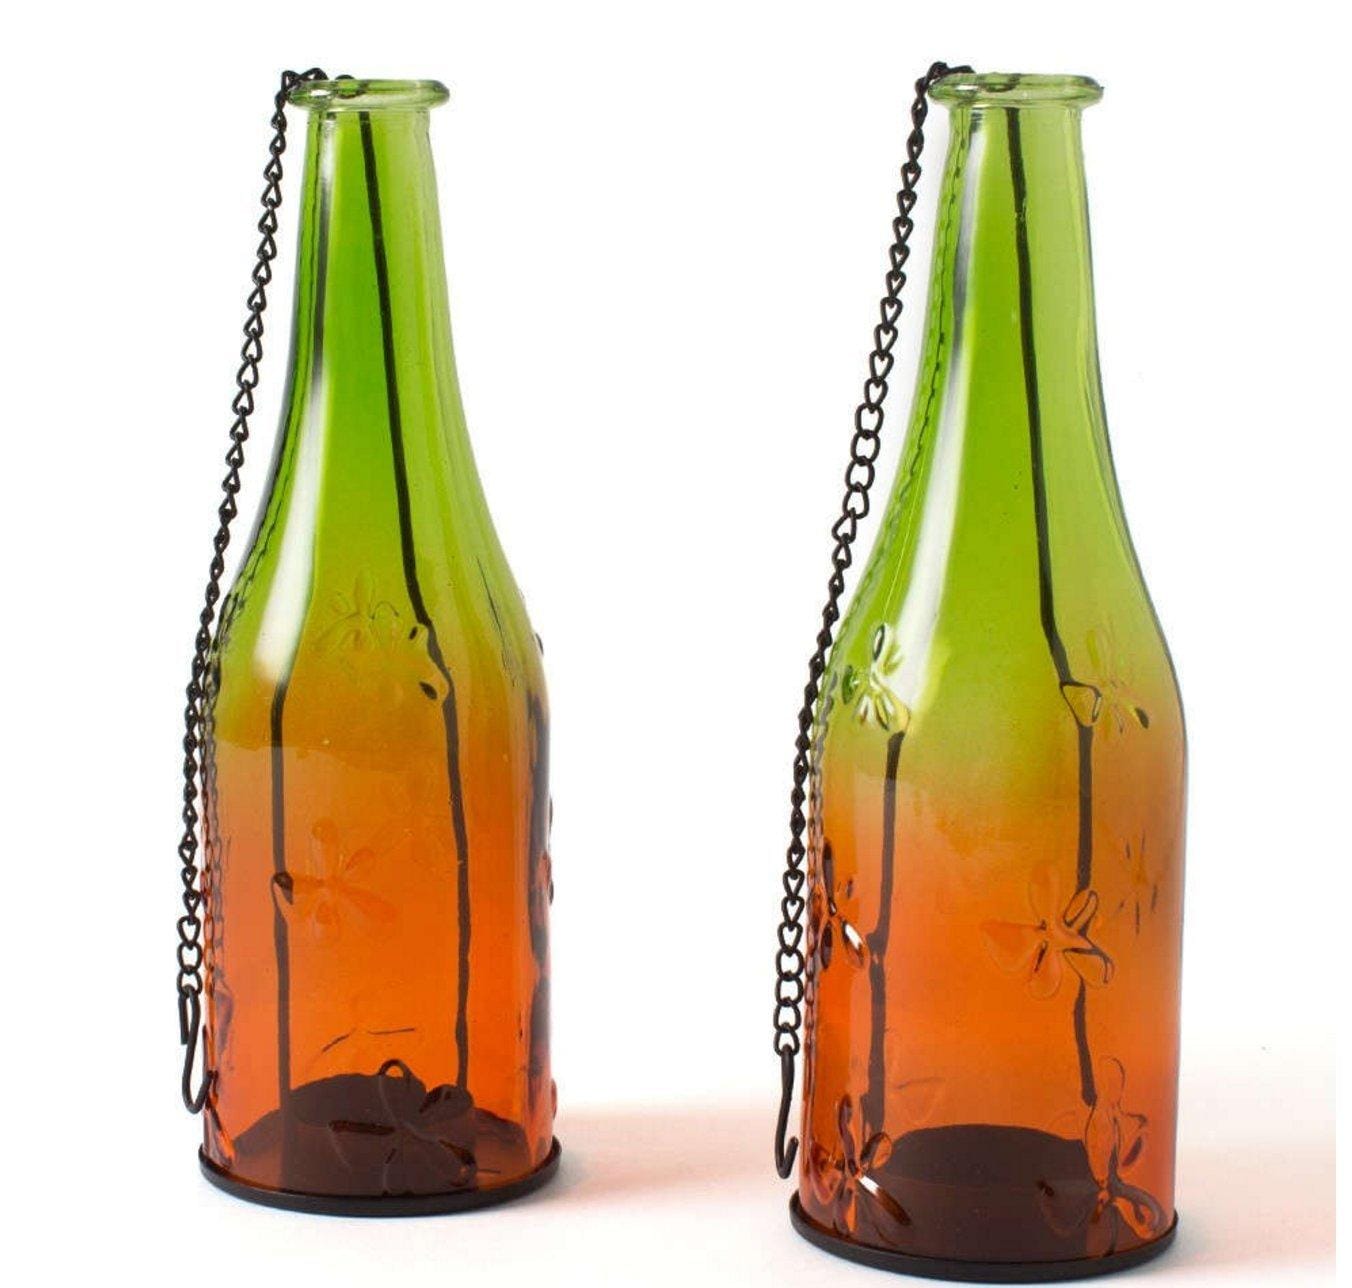 2-Tone Hanging Bottle Candle Stand - Green & Orange (Pack of 2)